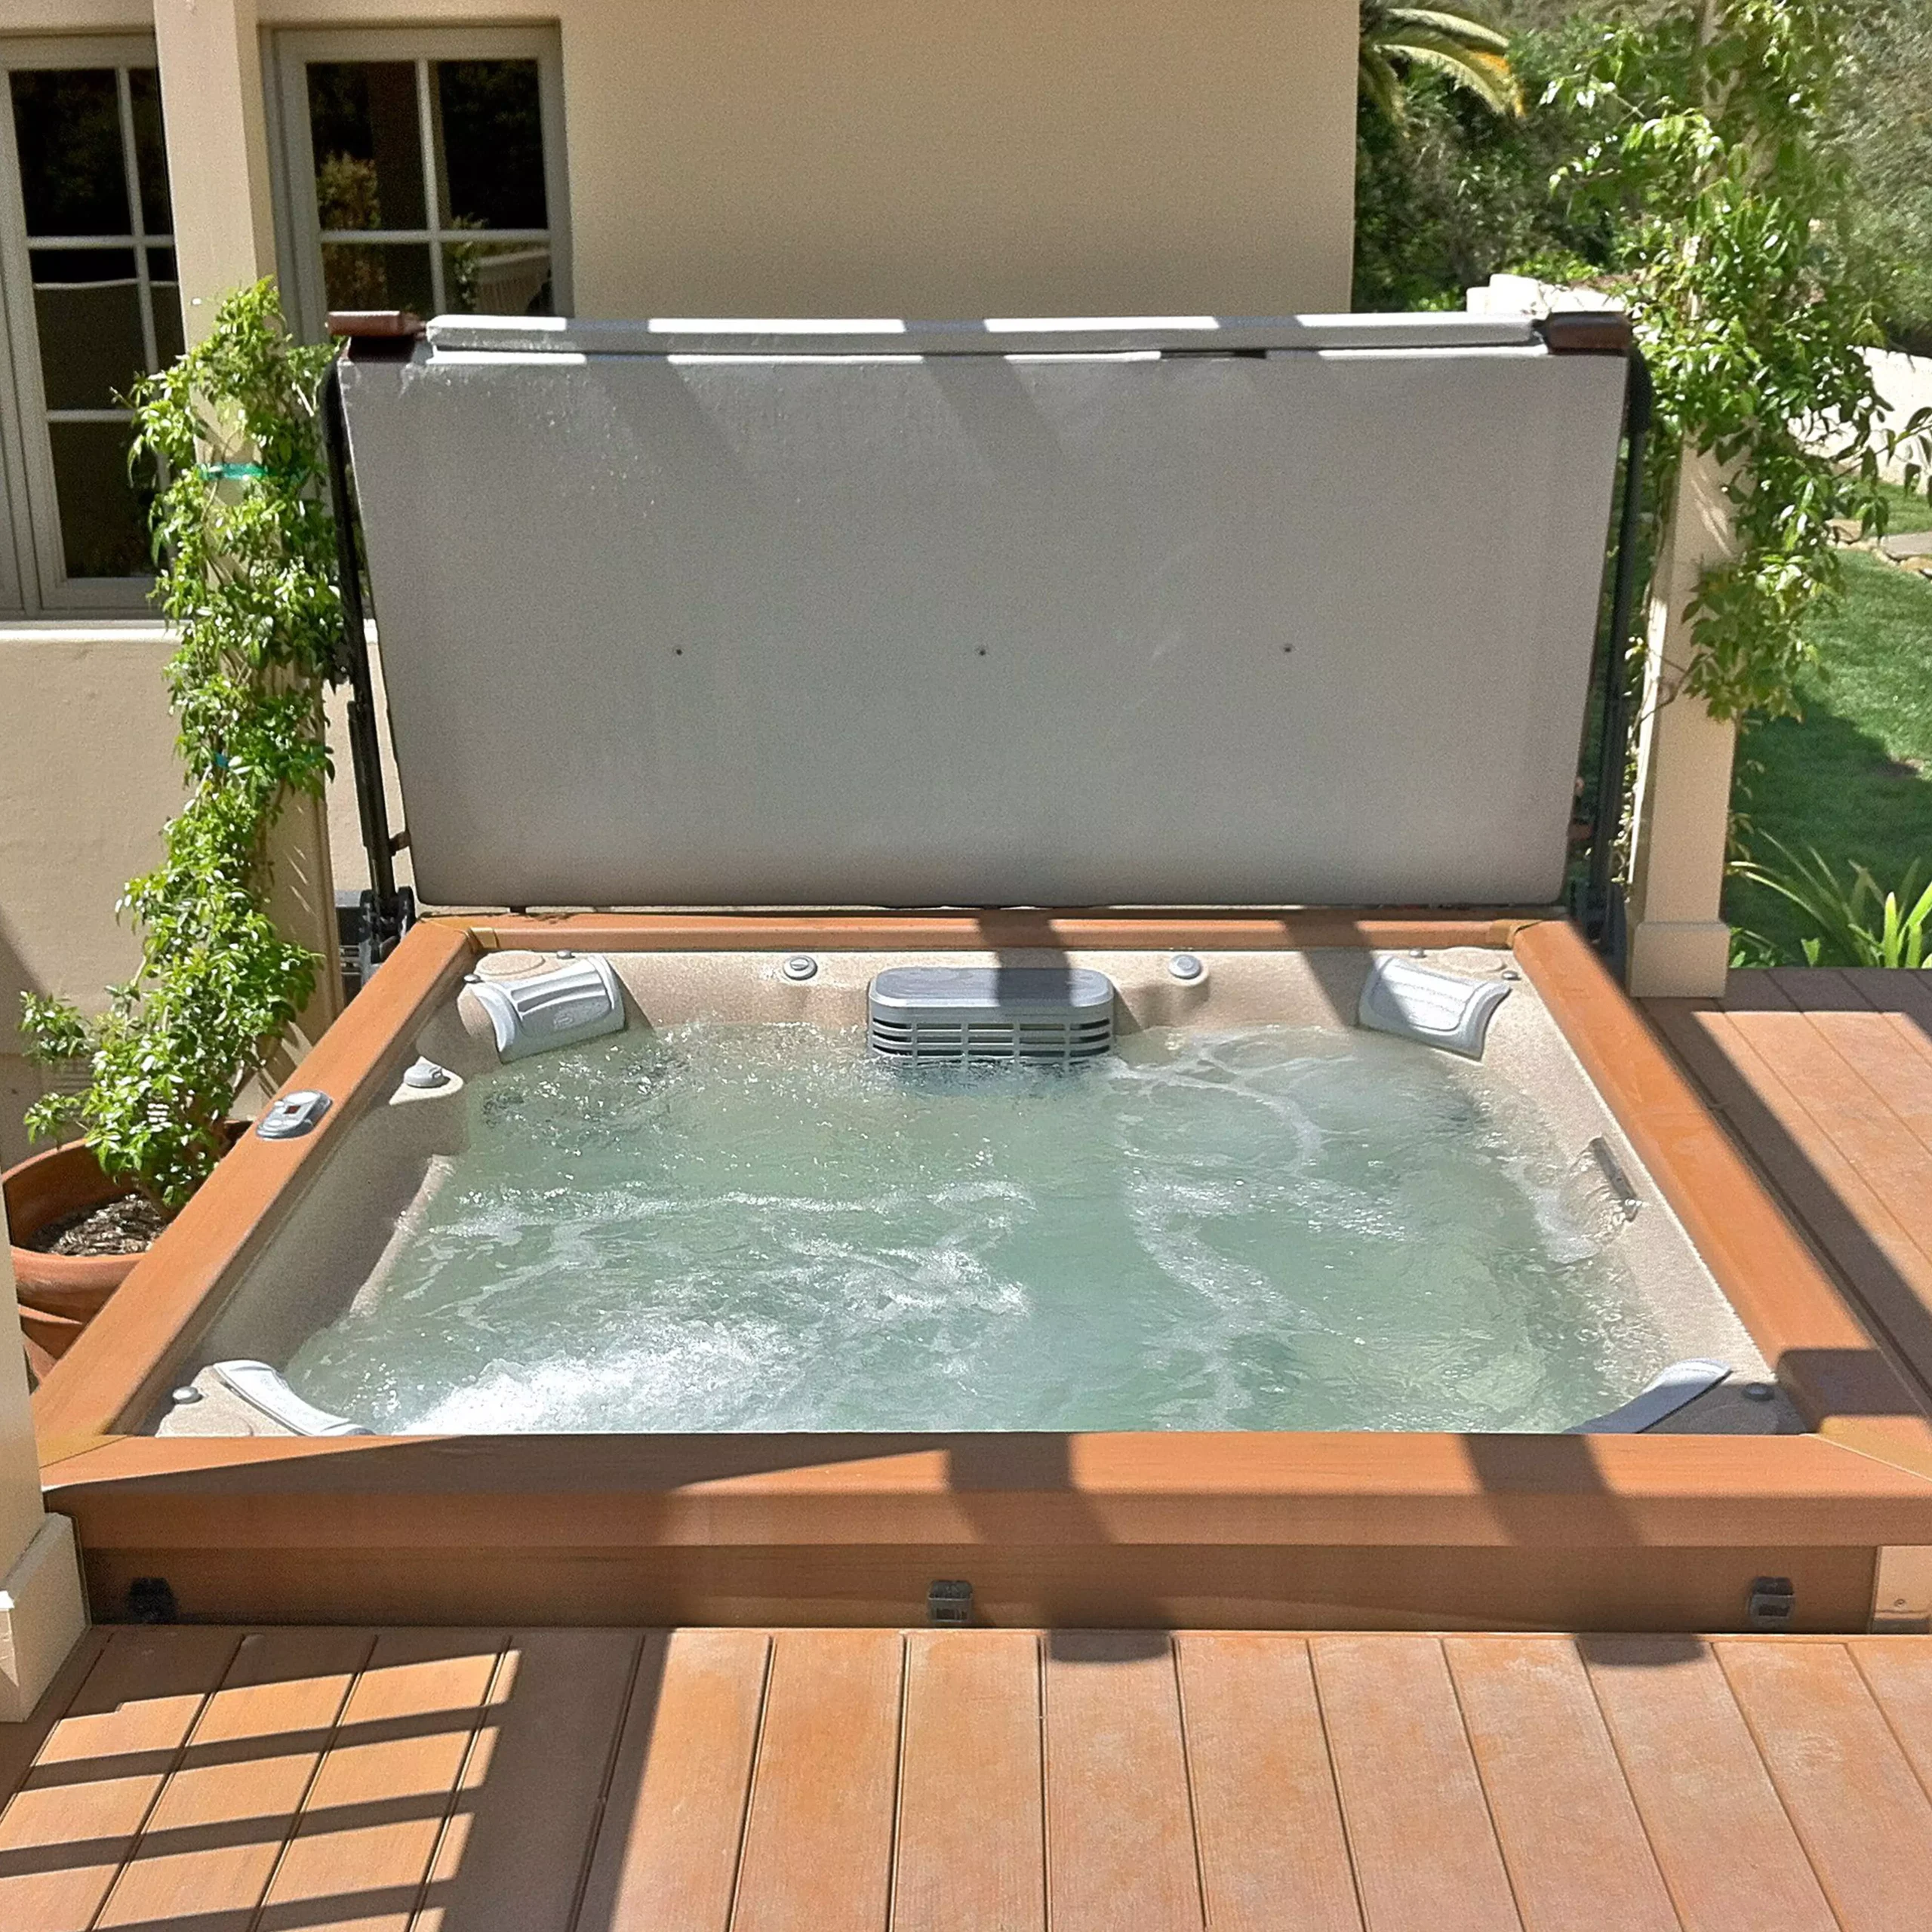 New Jacuzzi And Spa